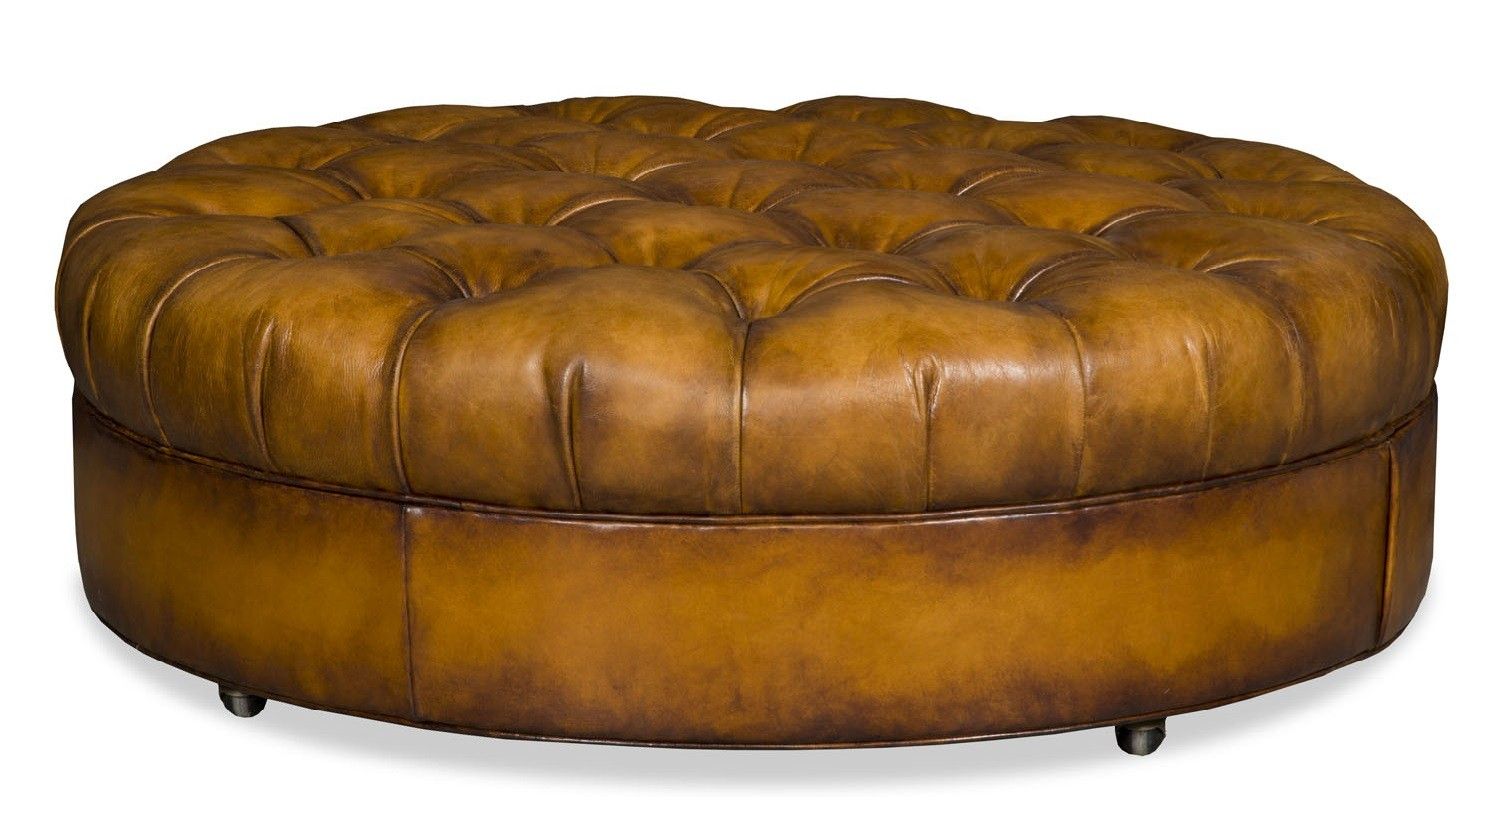 Round Leather Tufted Ottoman With Tufted Ottomans (View 4 of 20)